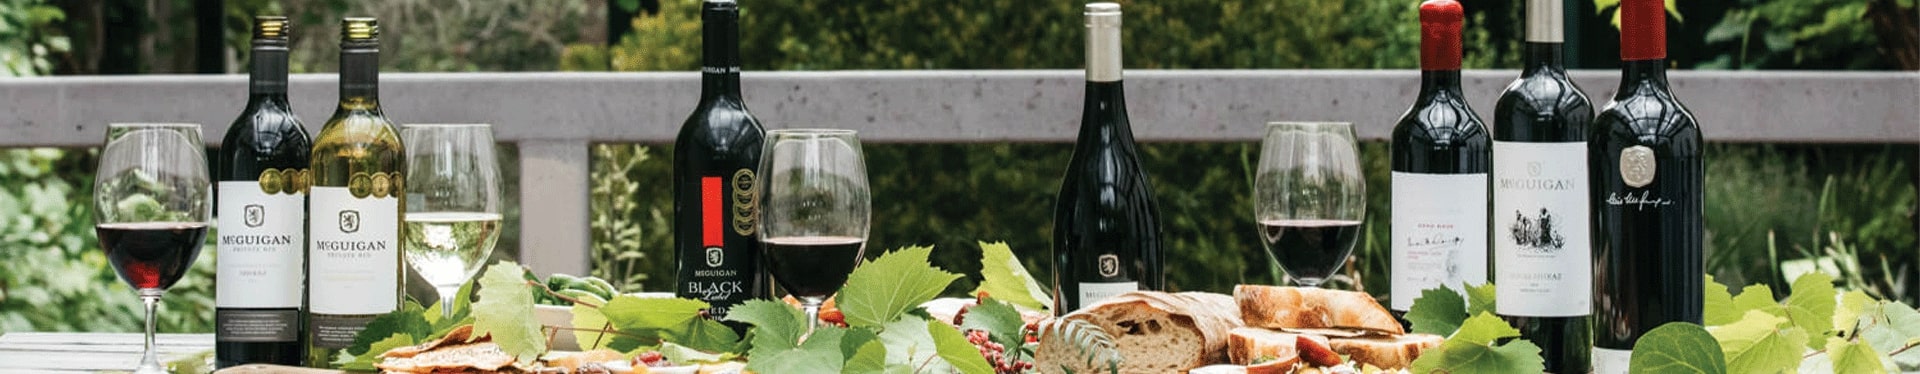 McGuigan Wines collections on a table in outdoor setting with food